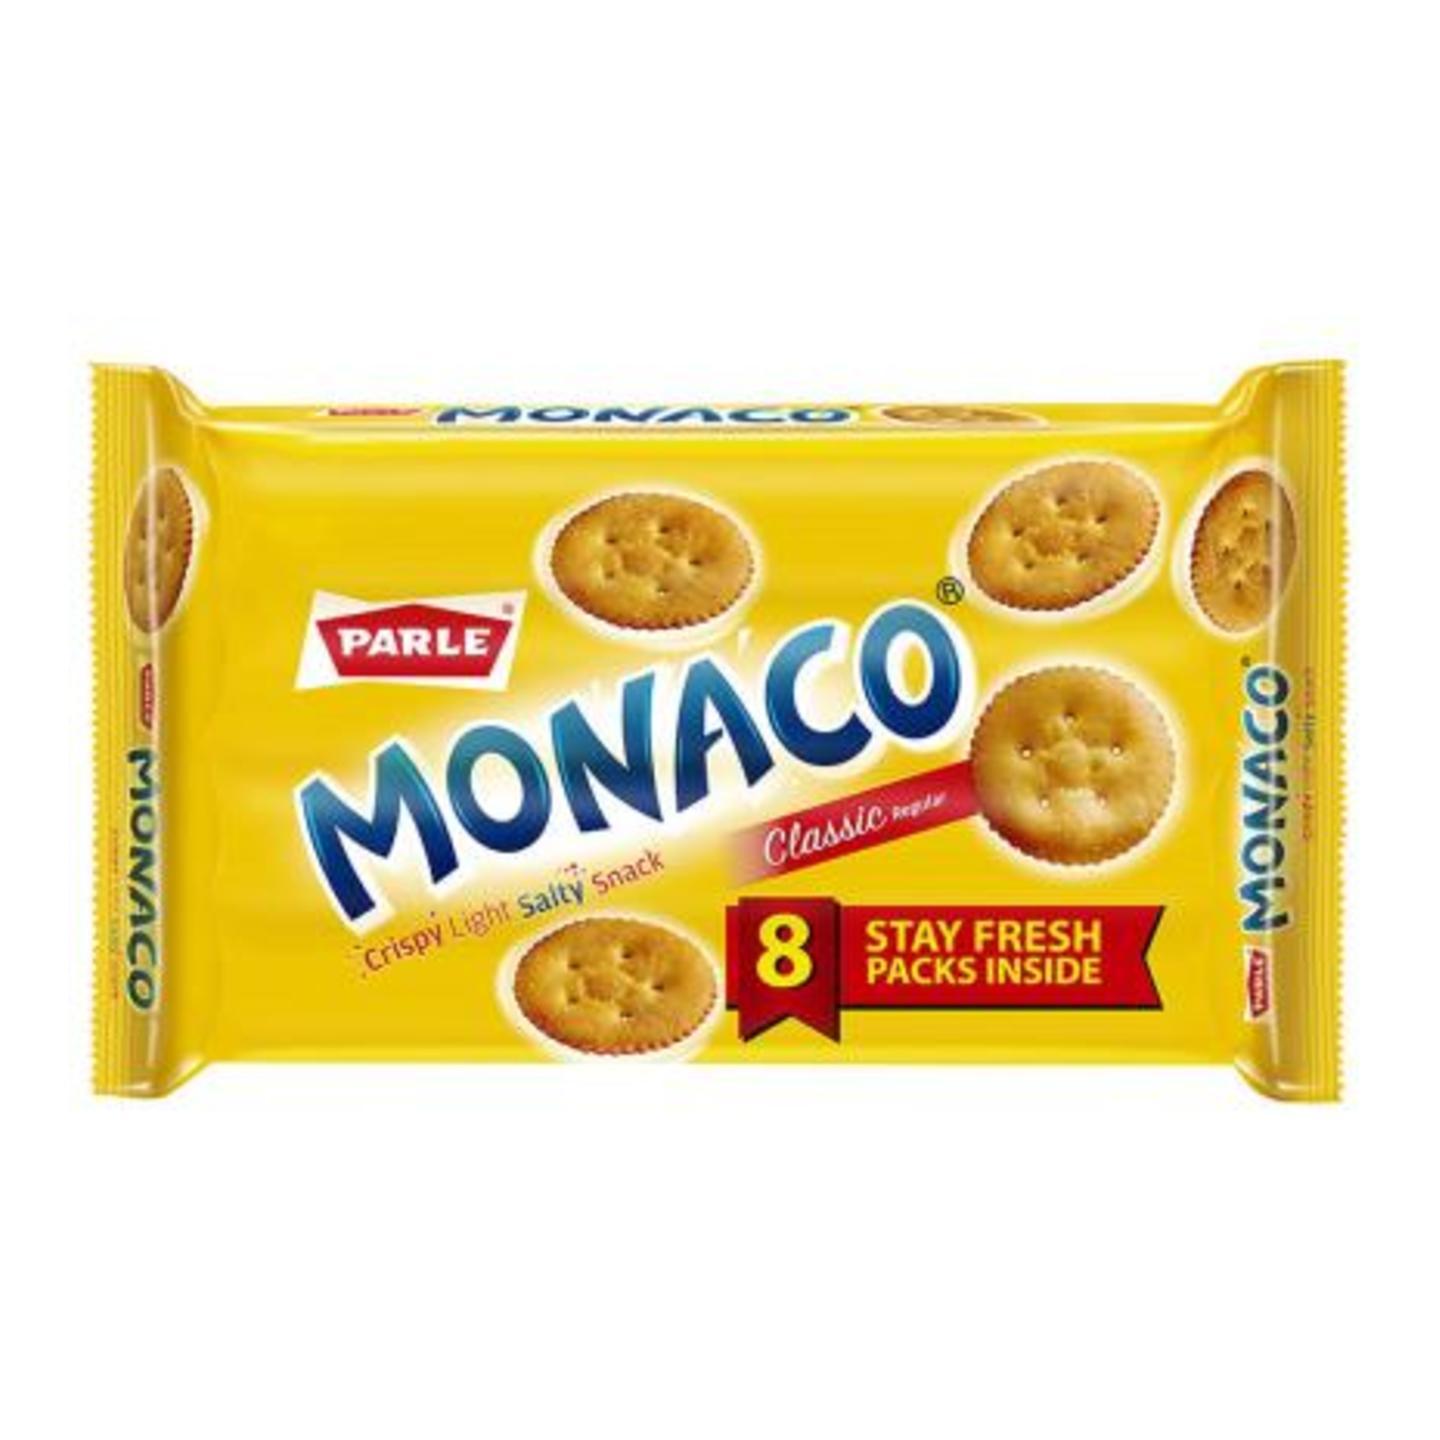 Parle Monaco Classic Regular Salted Biscuits 400 g